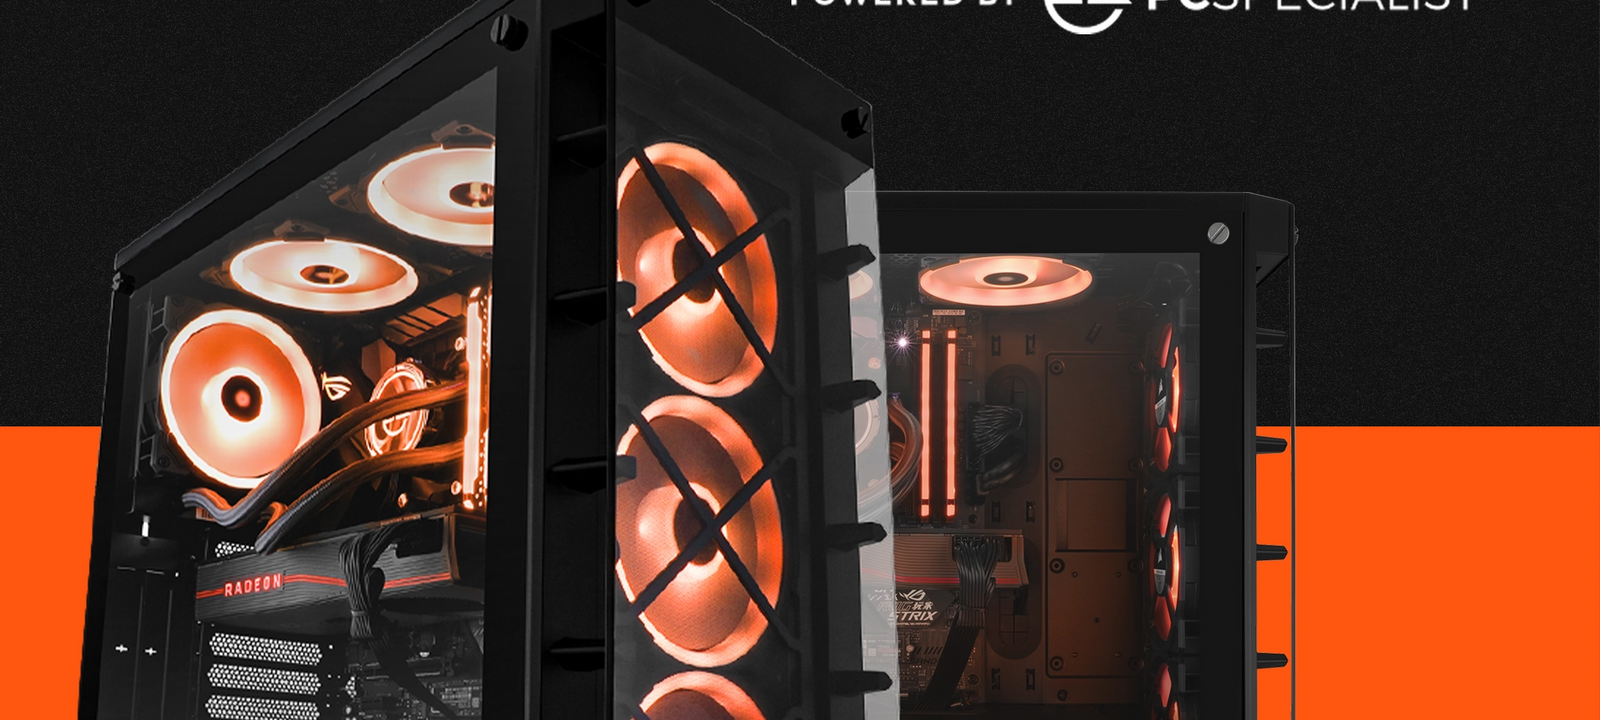 PCSpecialist teams up with Esports Giant Fnatic as exclusive Gaming PC partner